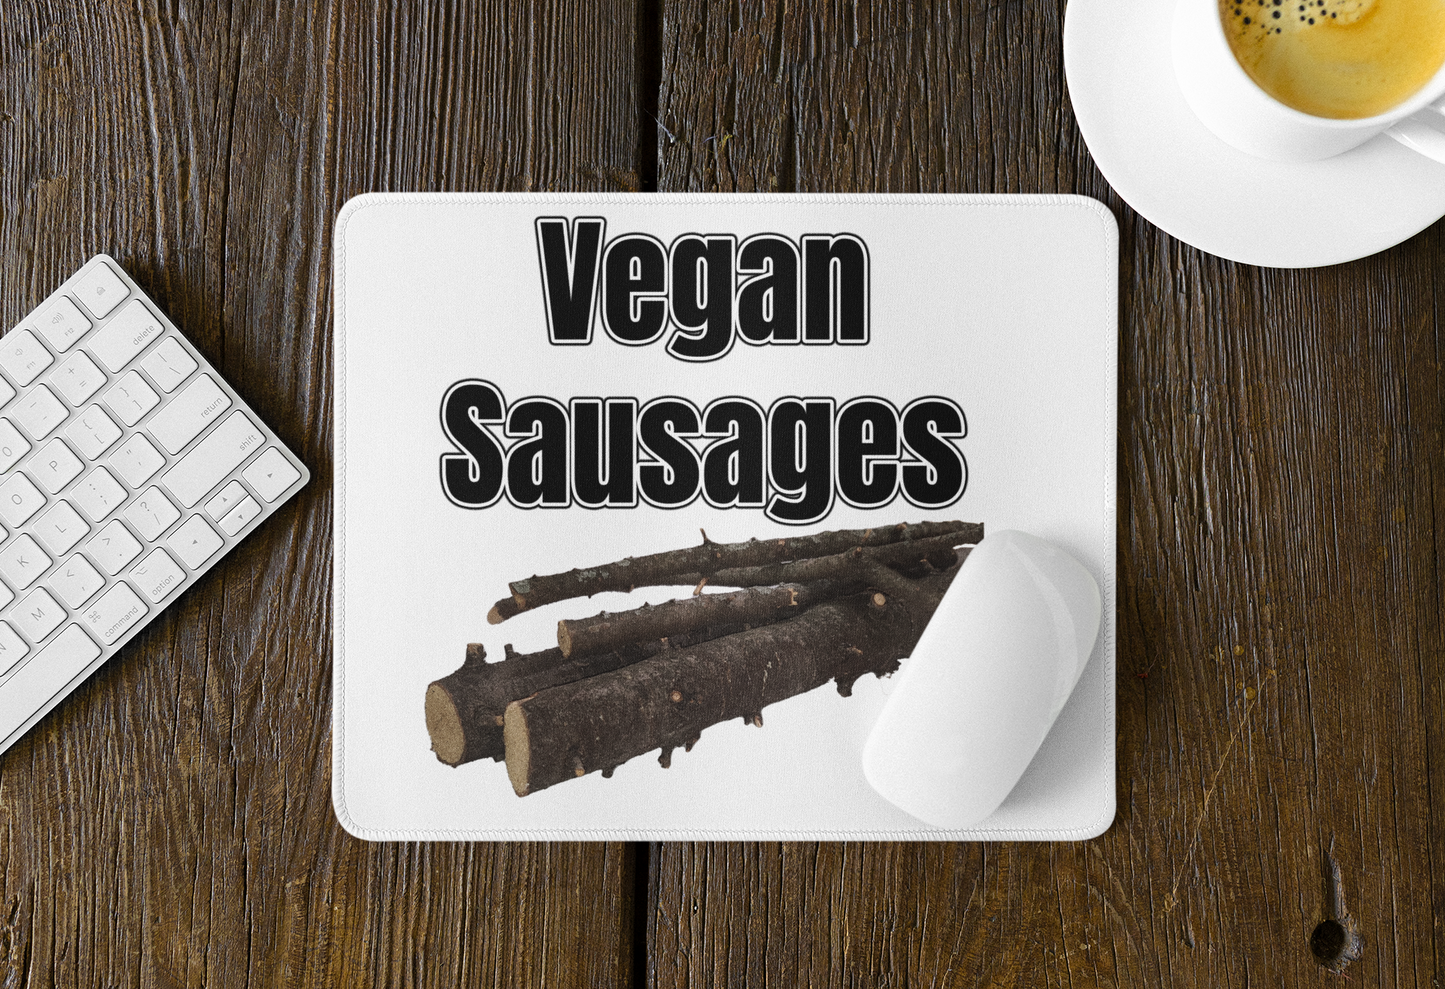 Vegan Sausages Mouse pad delicious gift for dad gift for mom keto meat meat eater pork Sausage tasty vegan